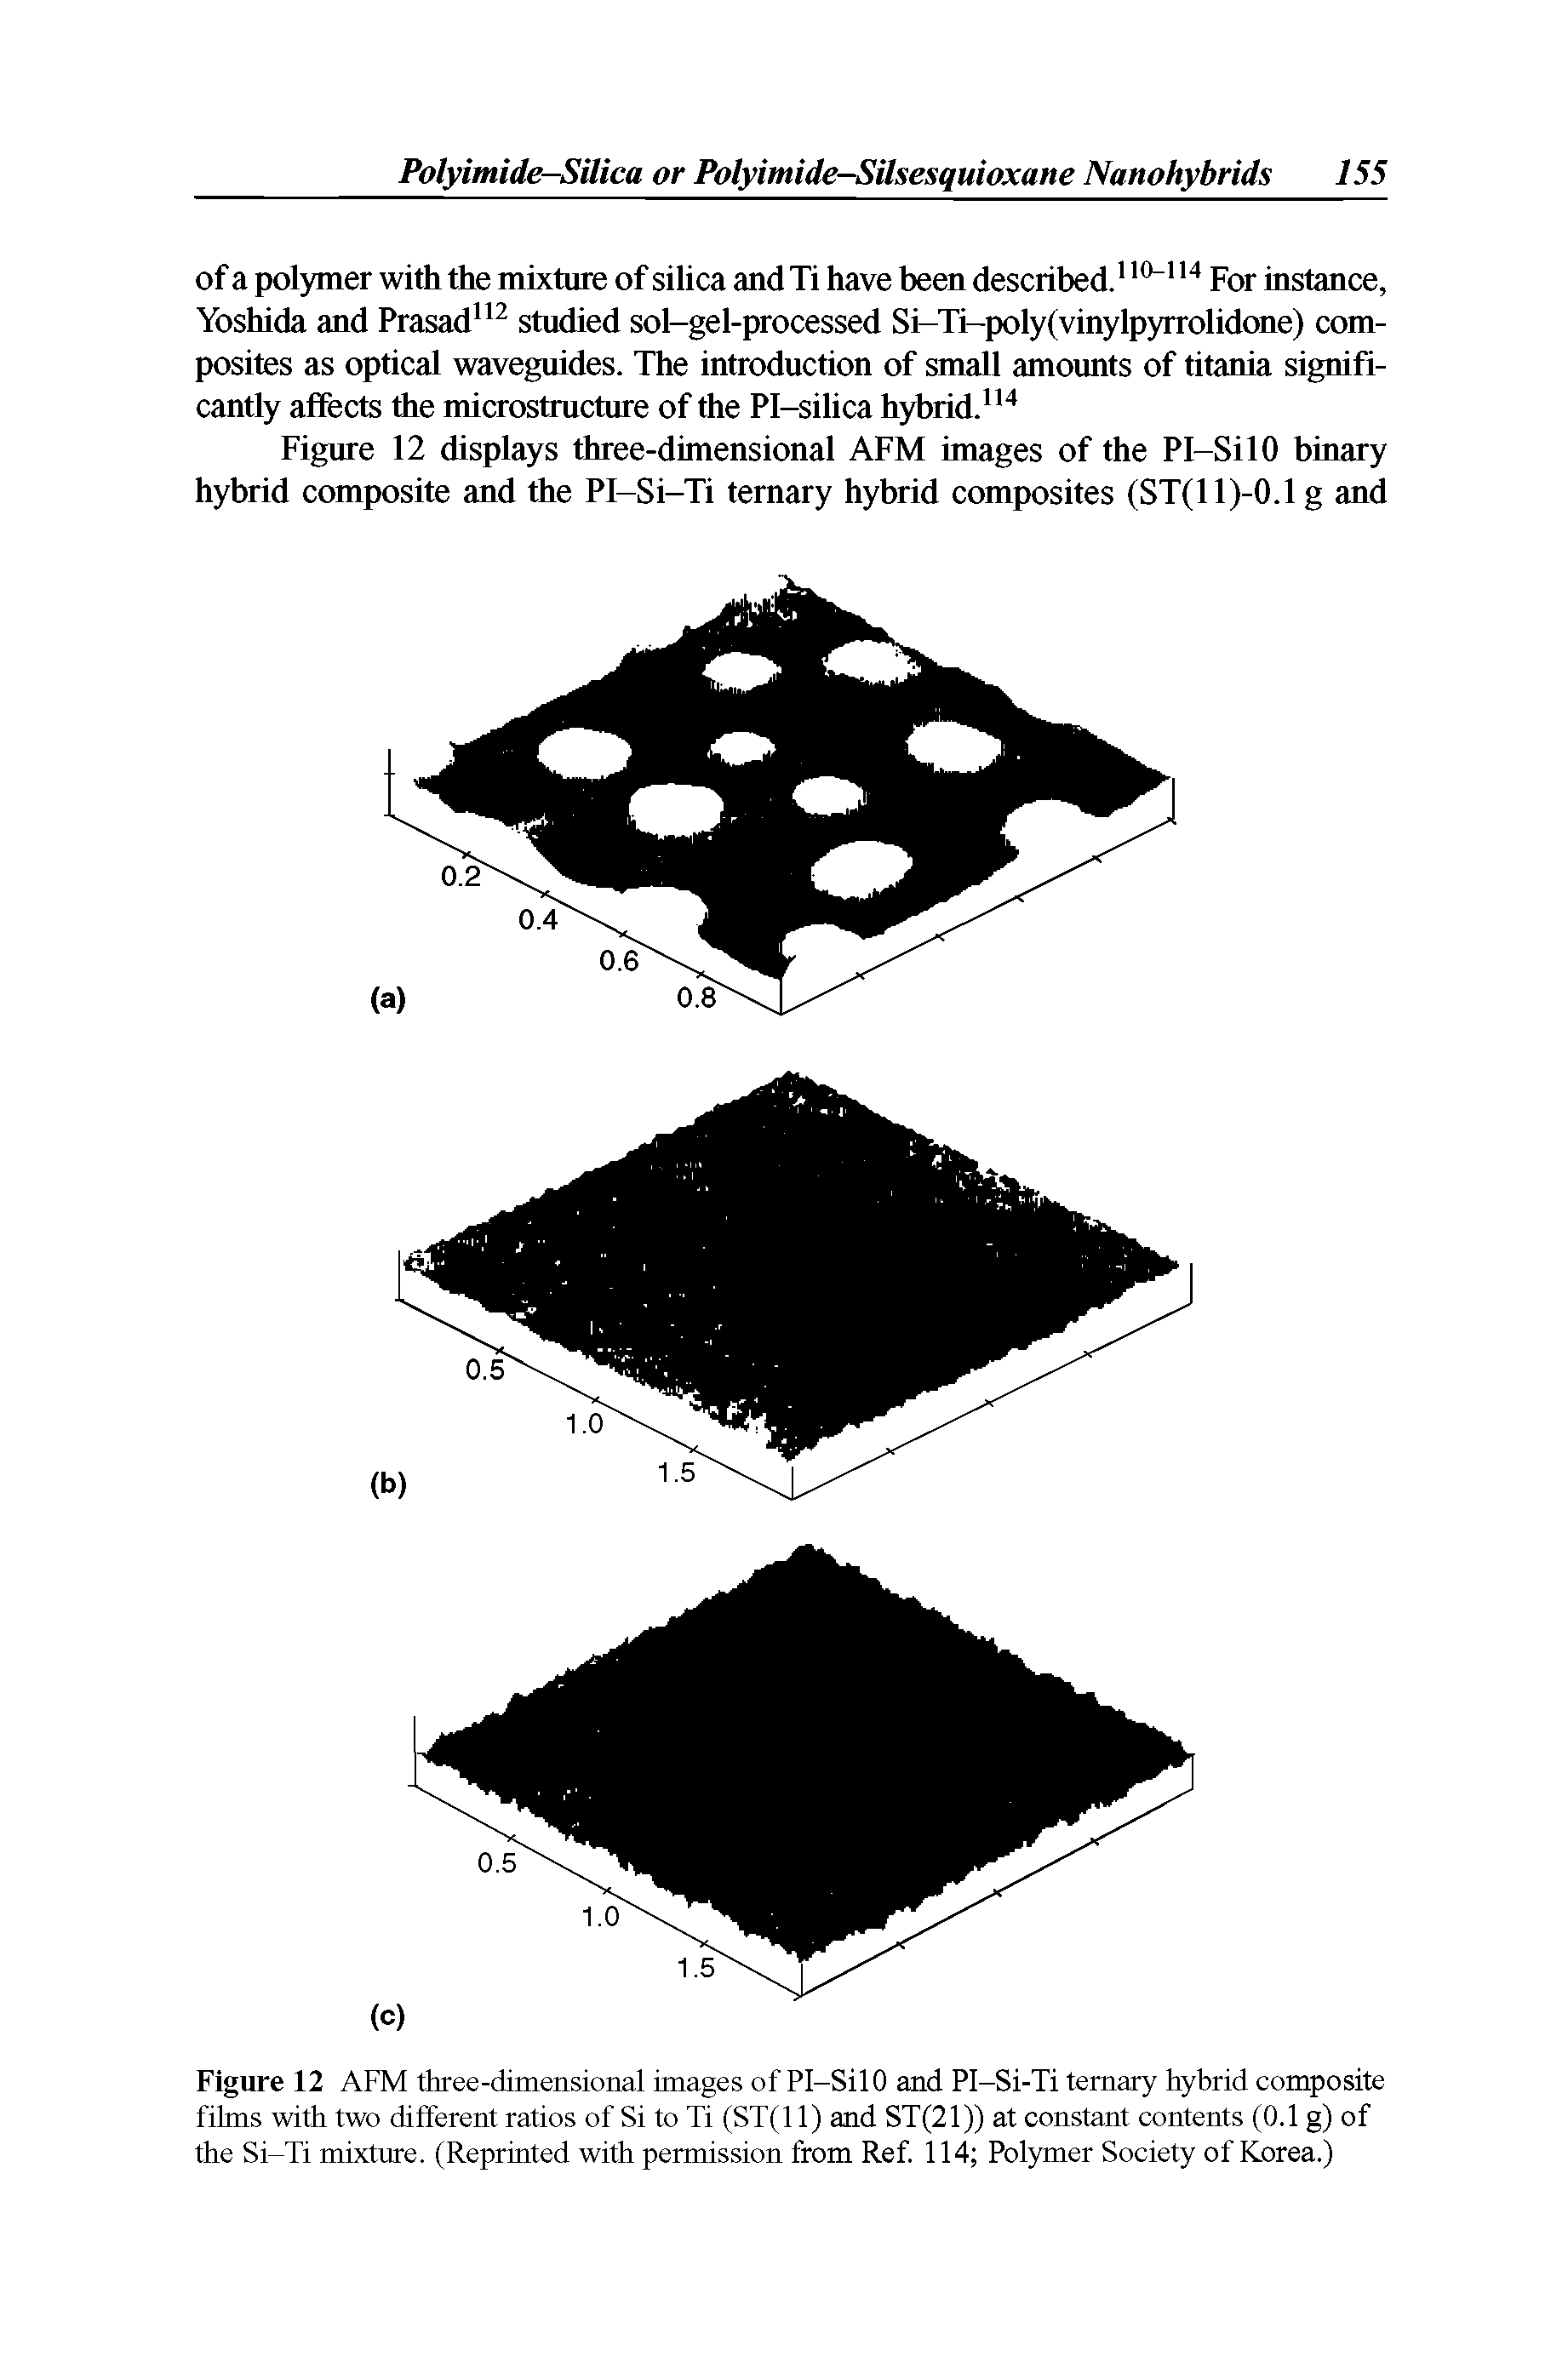 Figure 12 AFM three-dimensional images of Pl-SilO and PI-Si-Ti ternary hybrid composite films with two different ratios of Si to Ti (ST(11) and ST(21)) at constant contents (0.1 g) of the Si-Ti mixture. (Reprinted with permission from Ref. 114 Polymer Society of Korea.)...